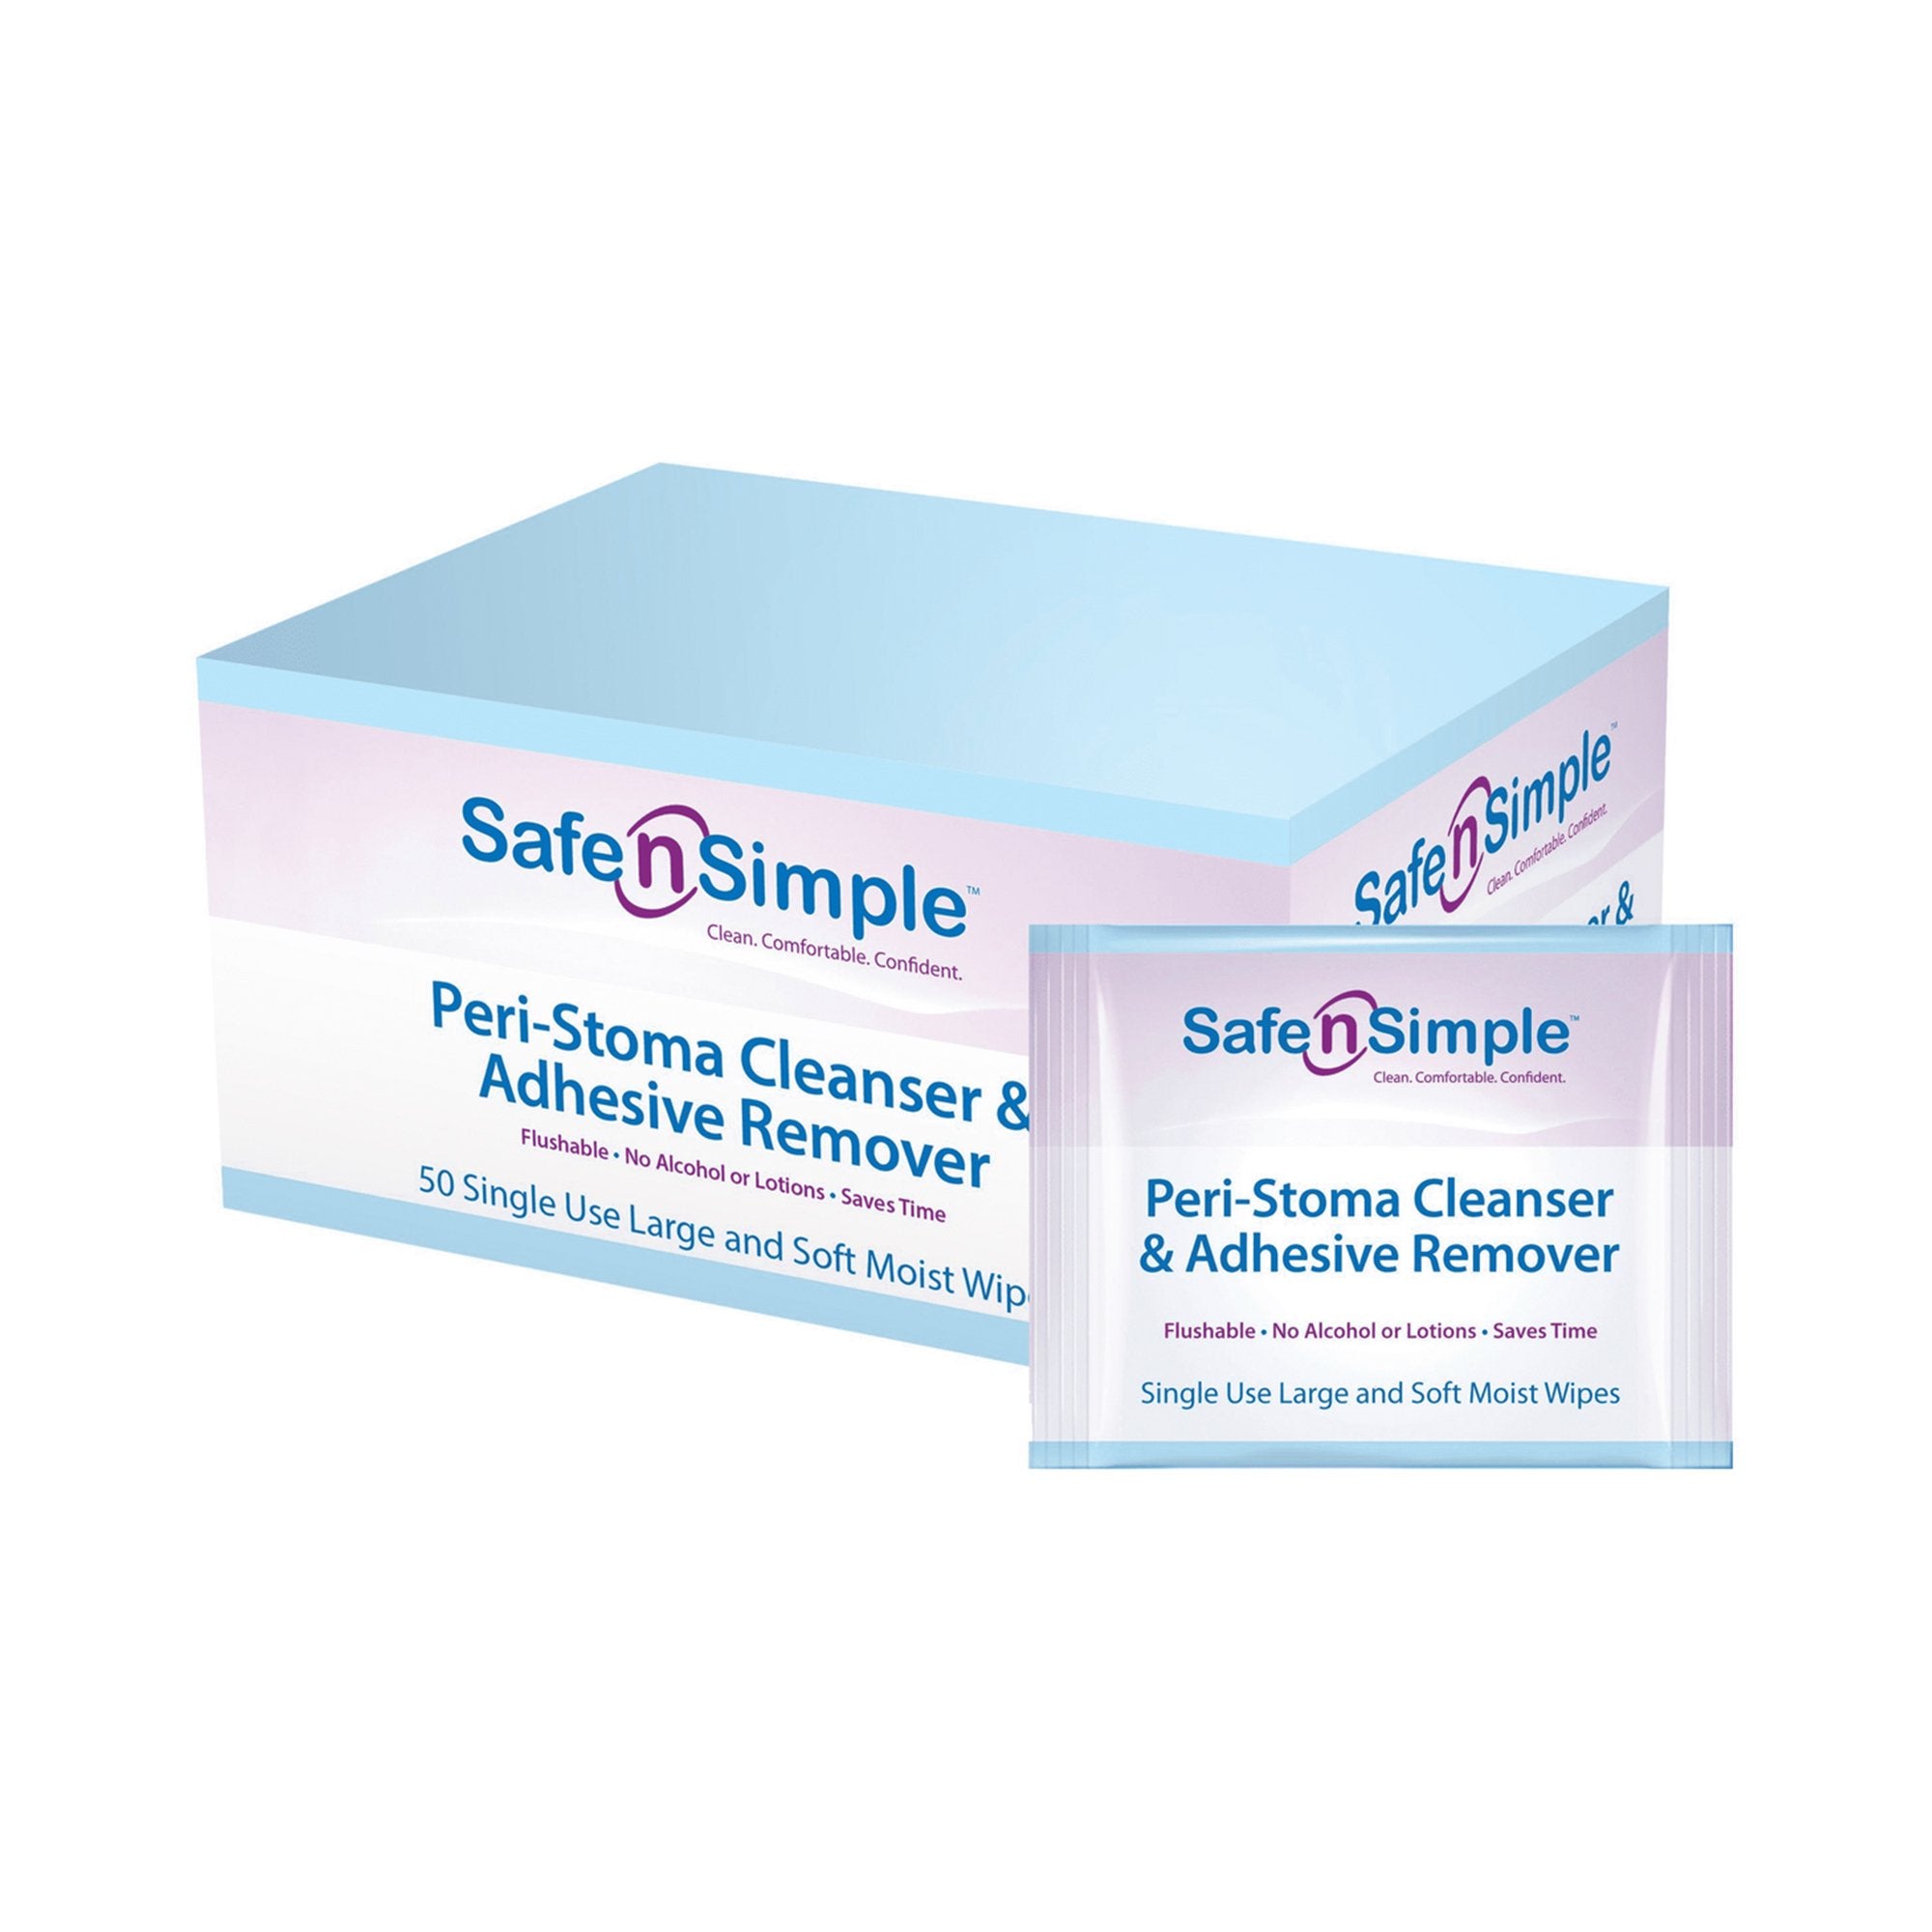 Adhesive Remover Safe n Simple™ Wipe 1 per Pack